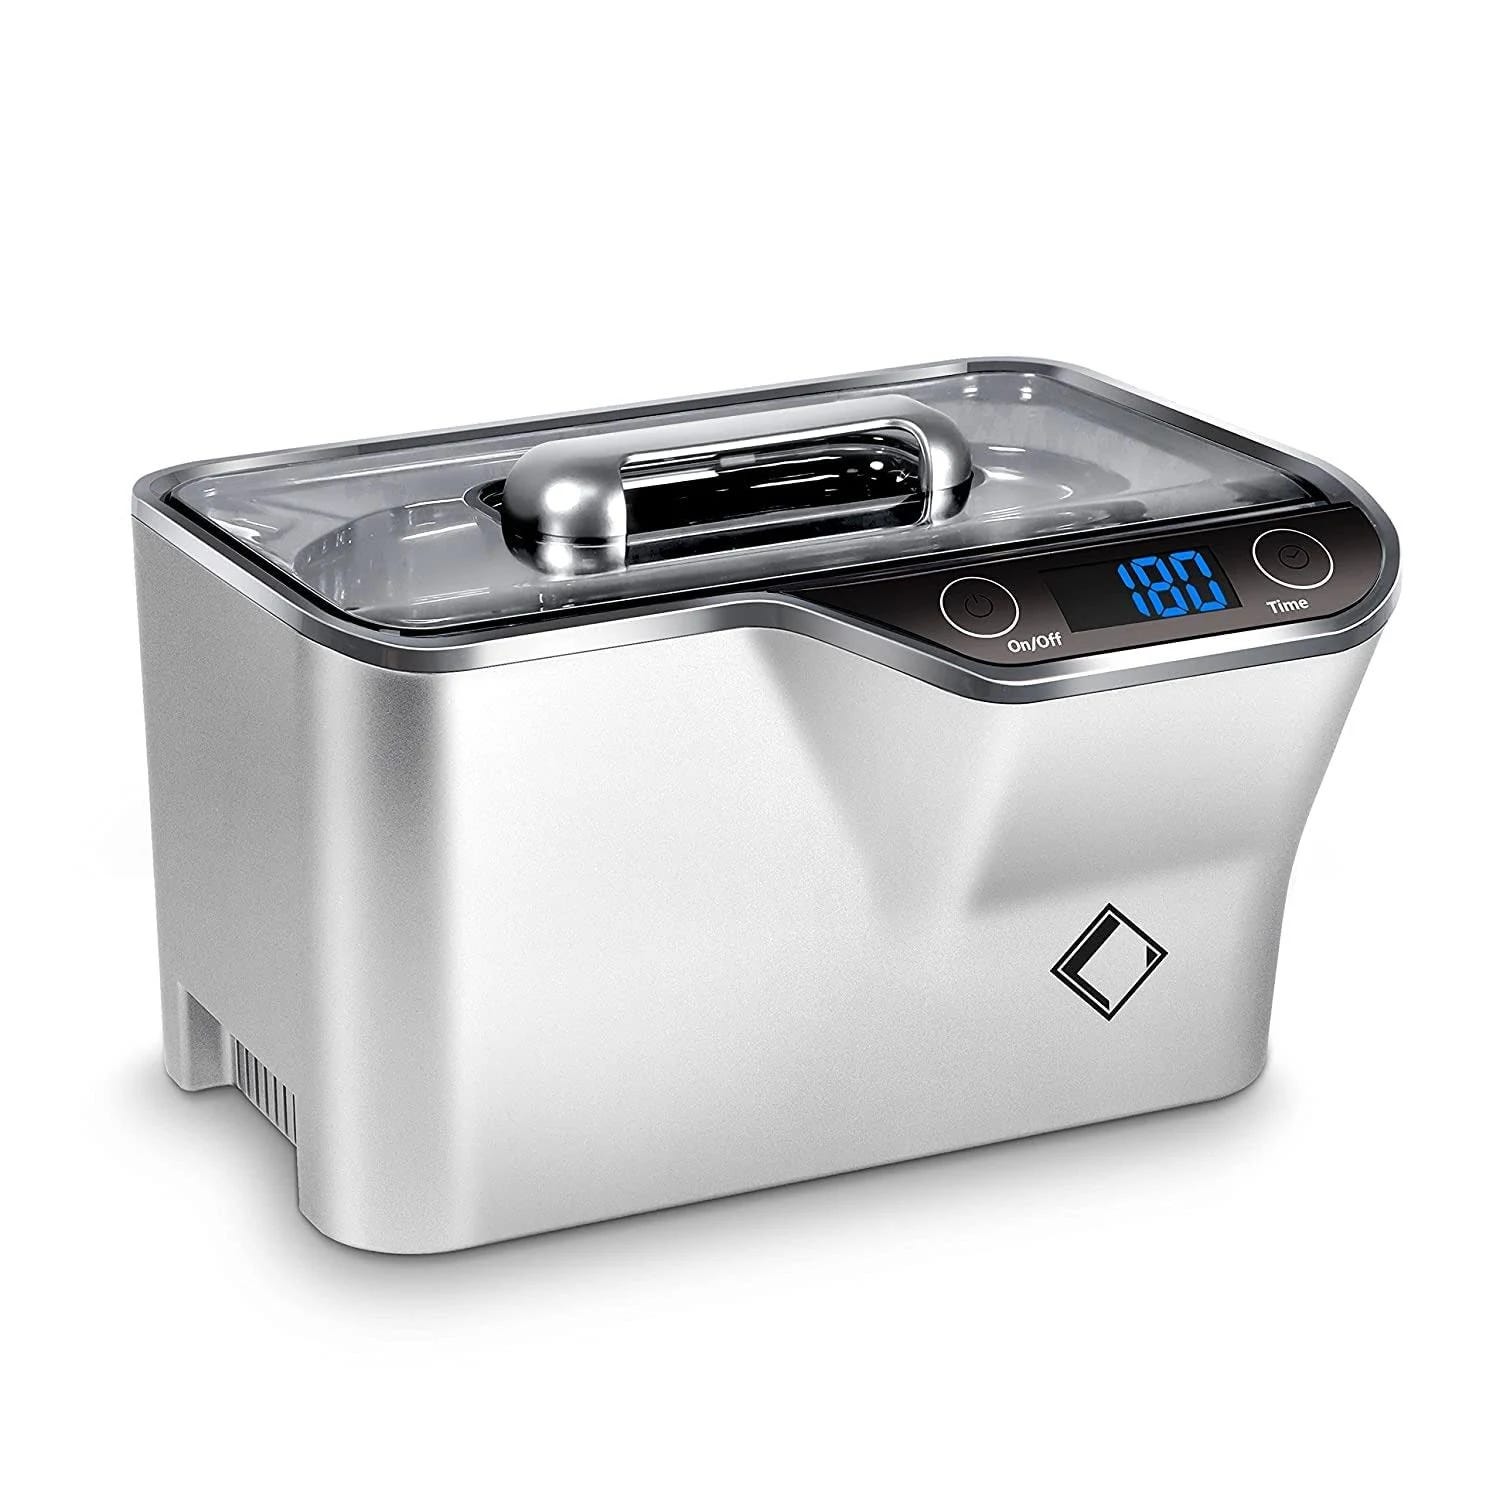 Professional Ultrasonic Cleaner with Digital Timer and Watch Stand | Image